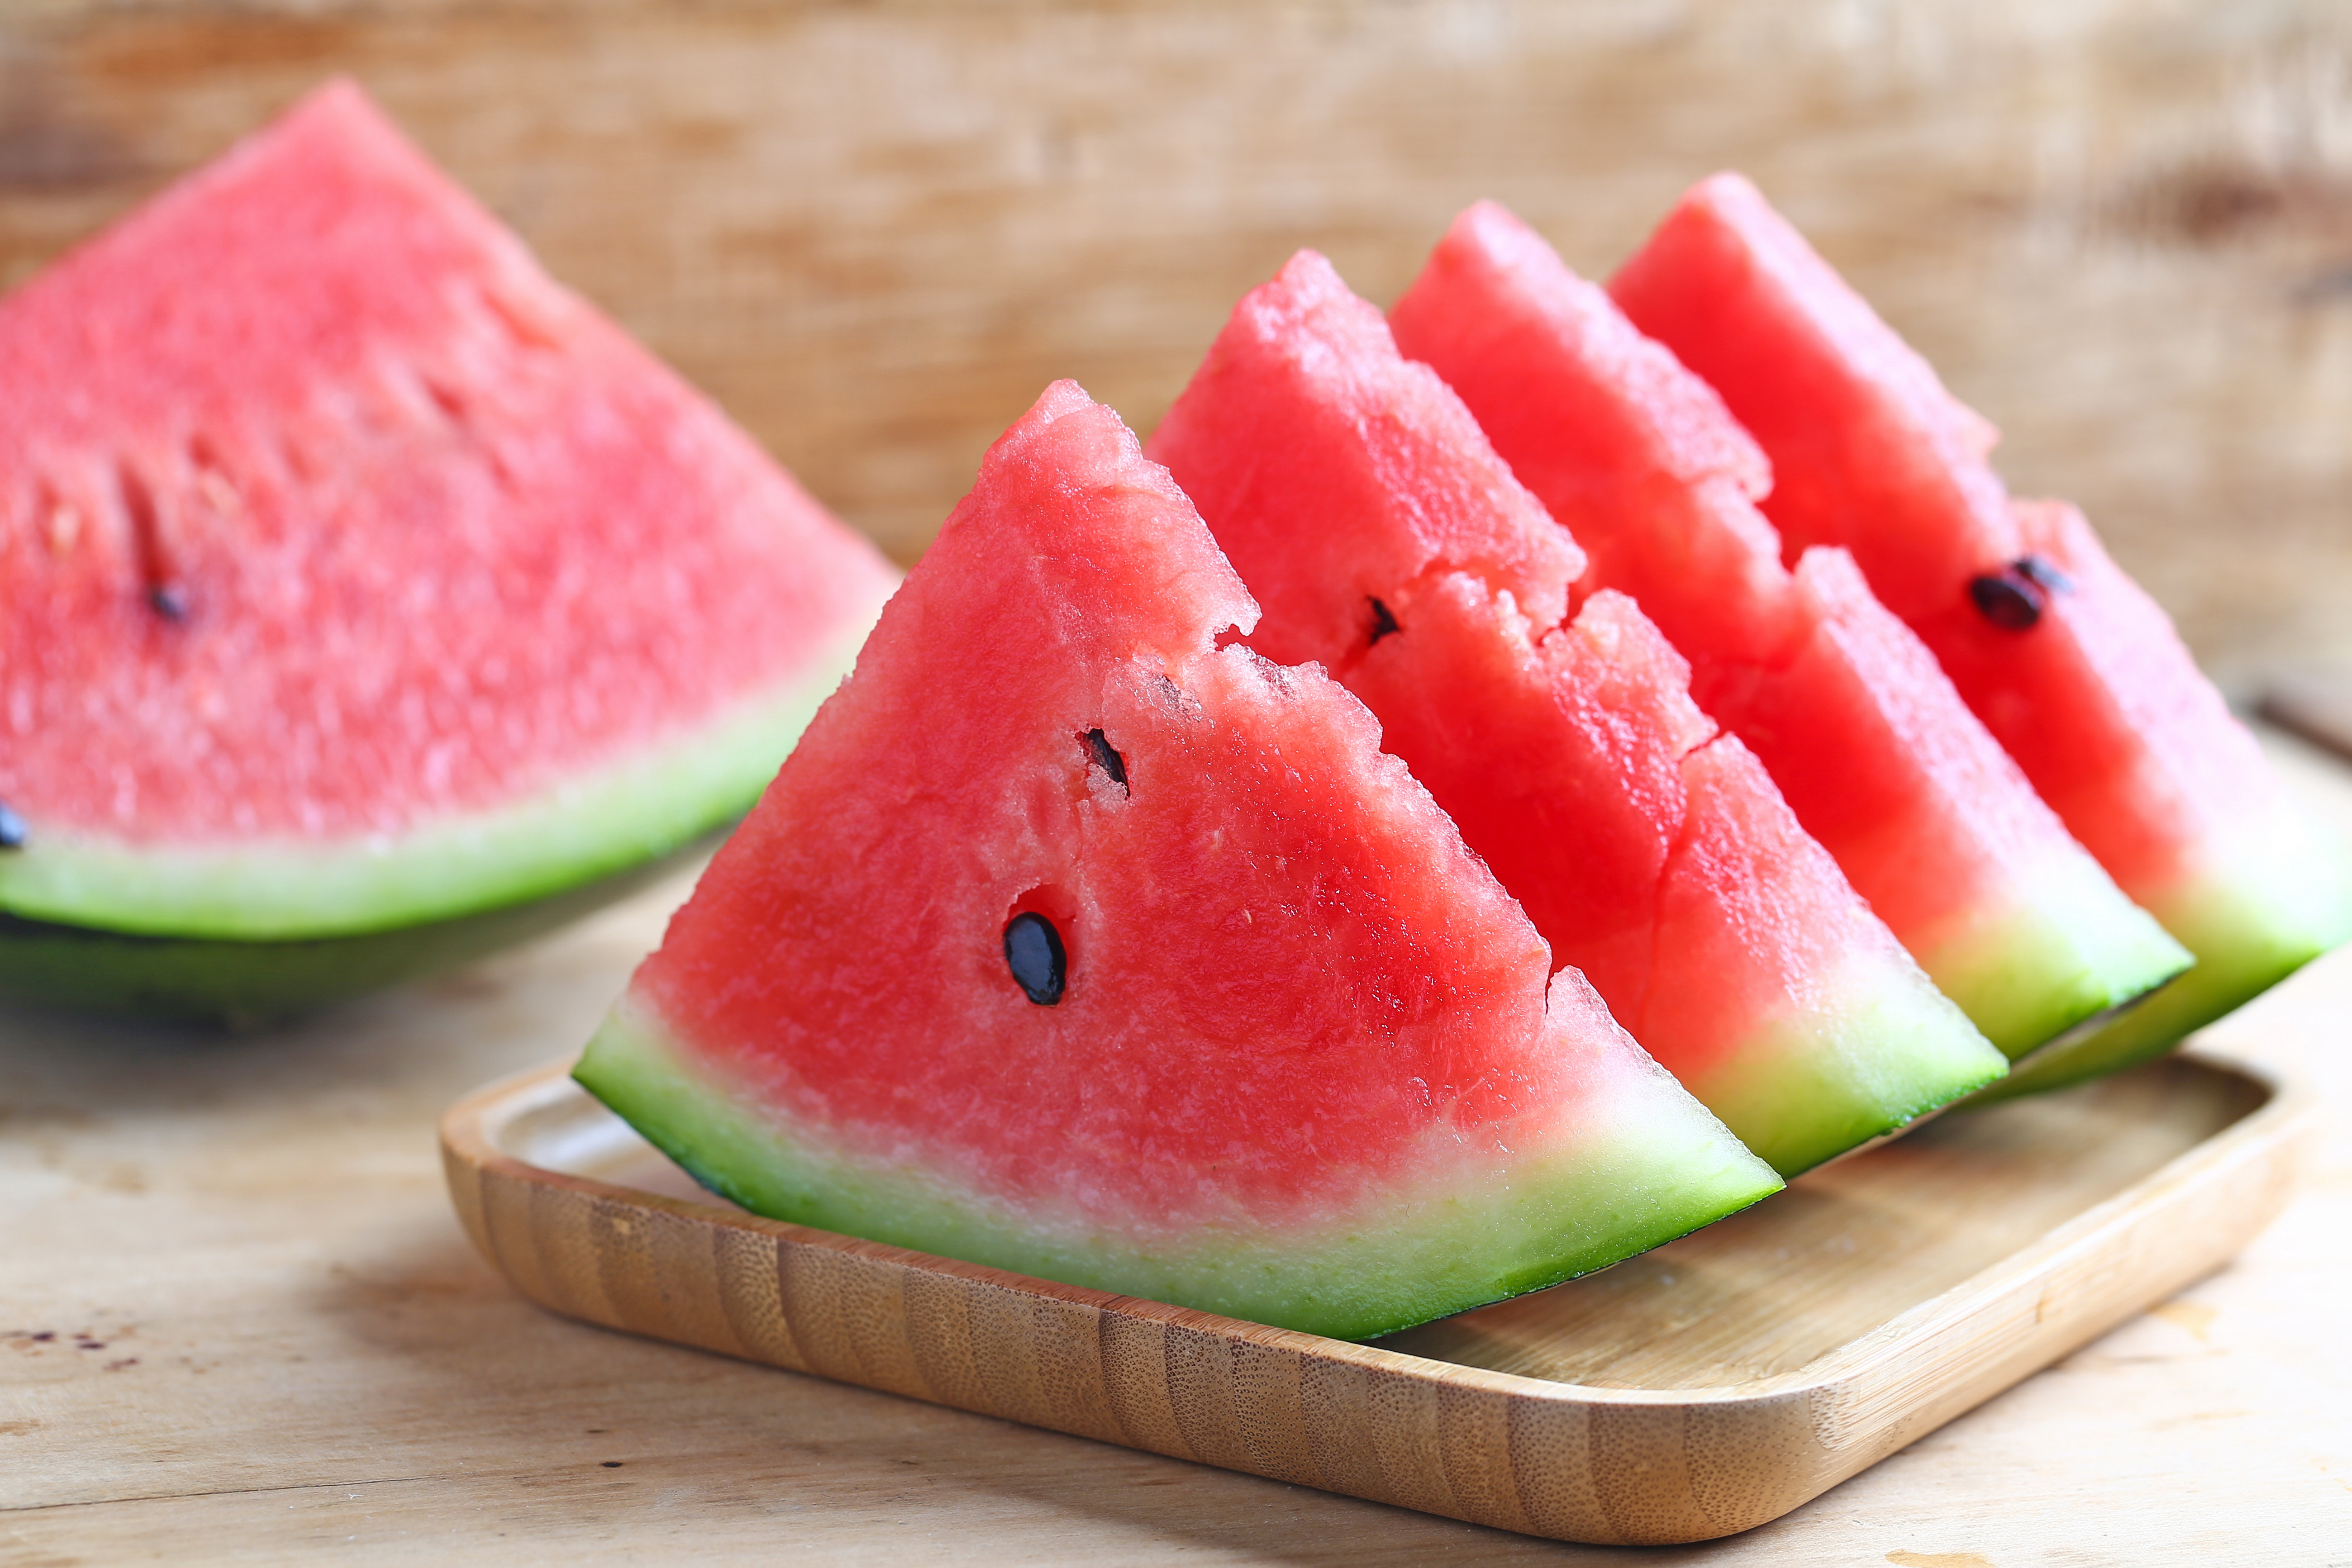 Reasons why you should eat Watermelon?